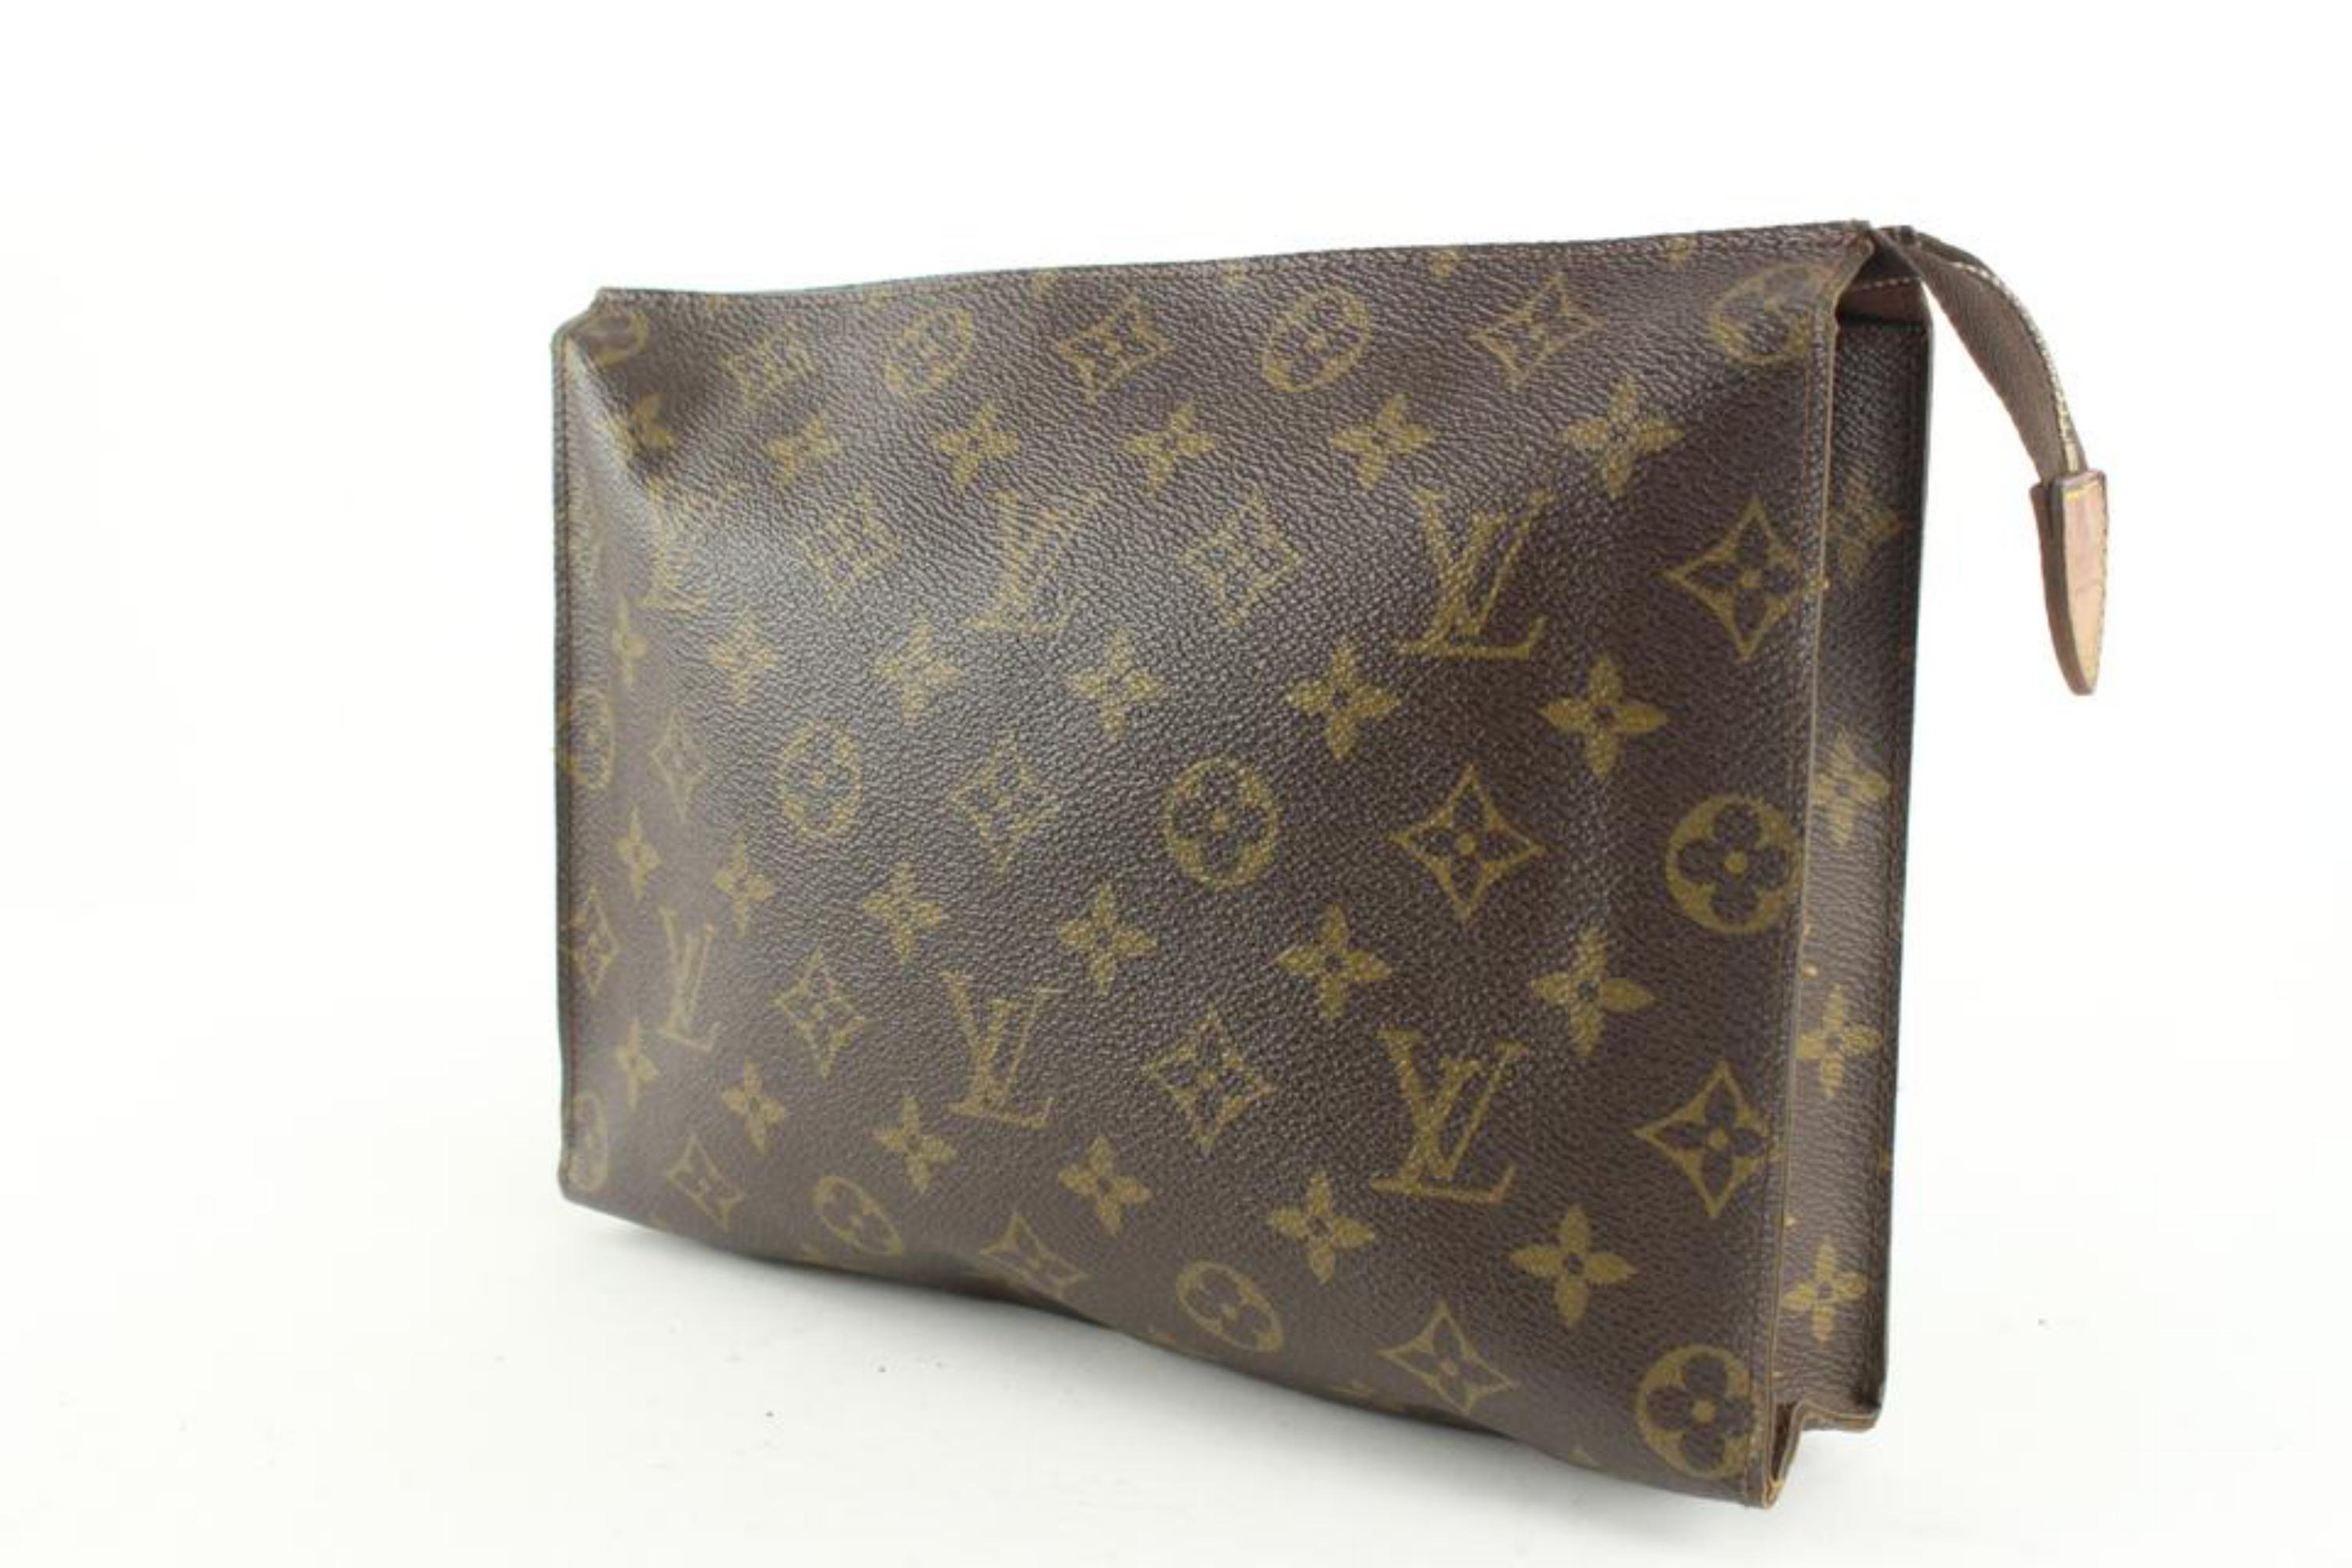 Louis Vuitton Discontinued Monogram Toiletry Pouch 26 Cosmetic Case 1224lv40
Made In: France
Measurements: Length:  10